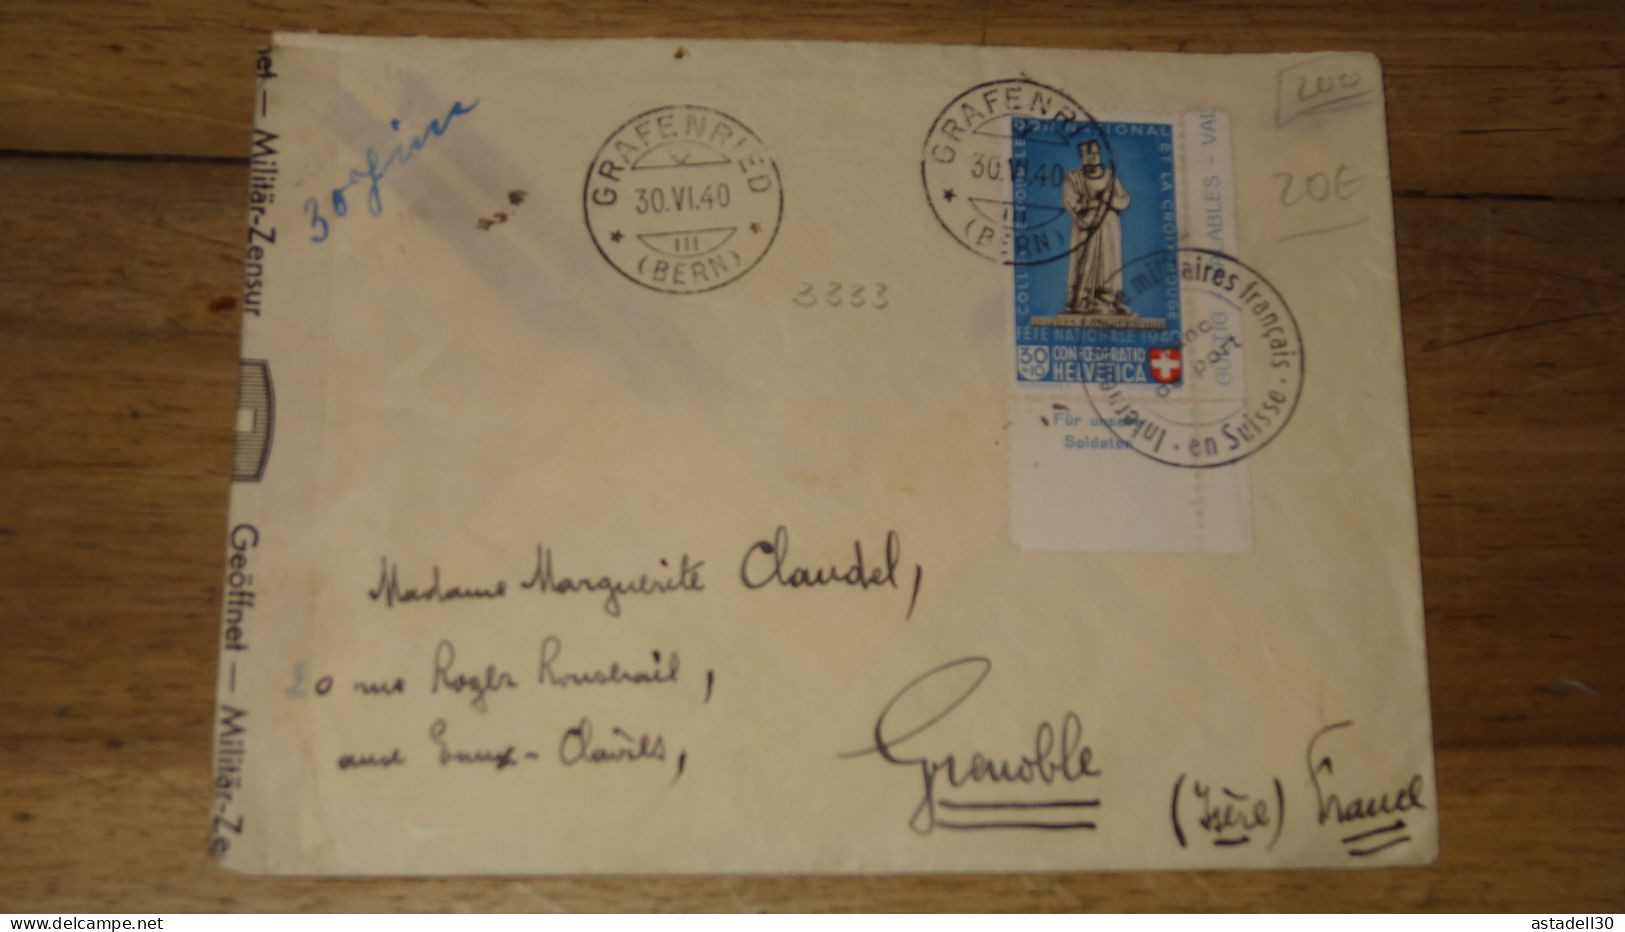 Enveloppe SUISSE Internement Militaires A Grafenried - 1940 ......... Boite1 ...... 240424-160 - Postmark Collection